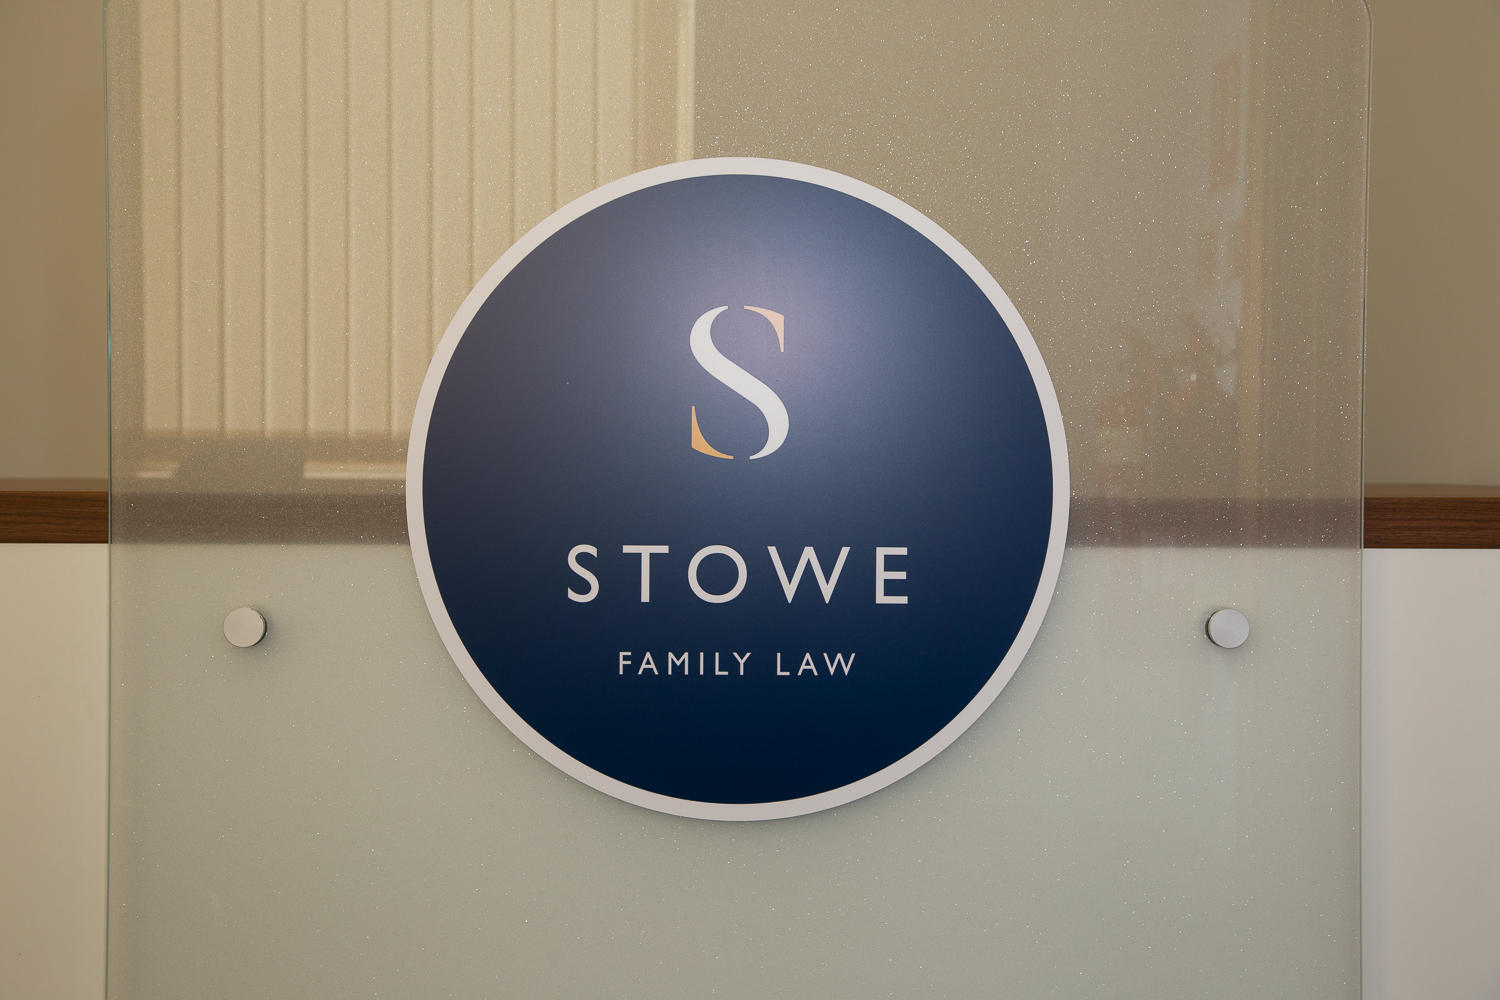 Stowe Family Law signage Stowe Family Law LLP - Divorce Solicitors St Albans St Albans 01727 841875